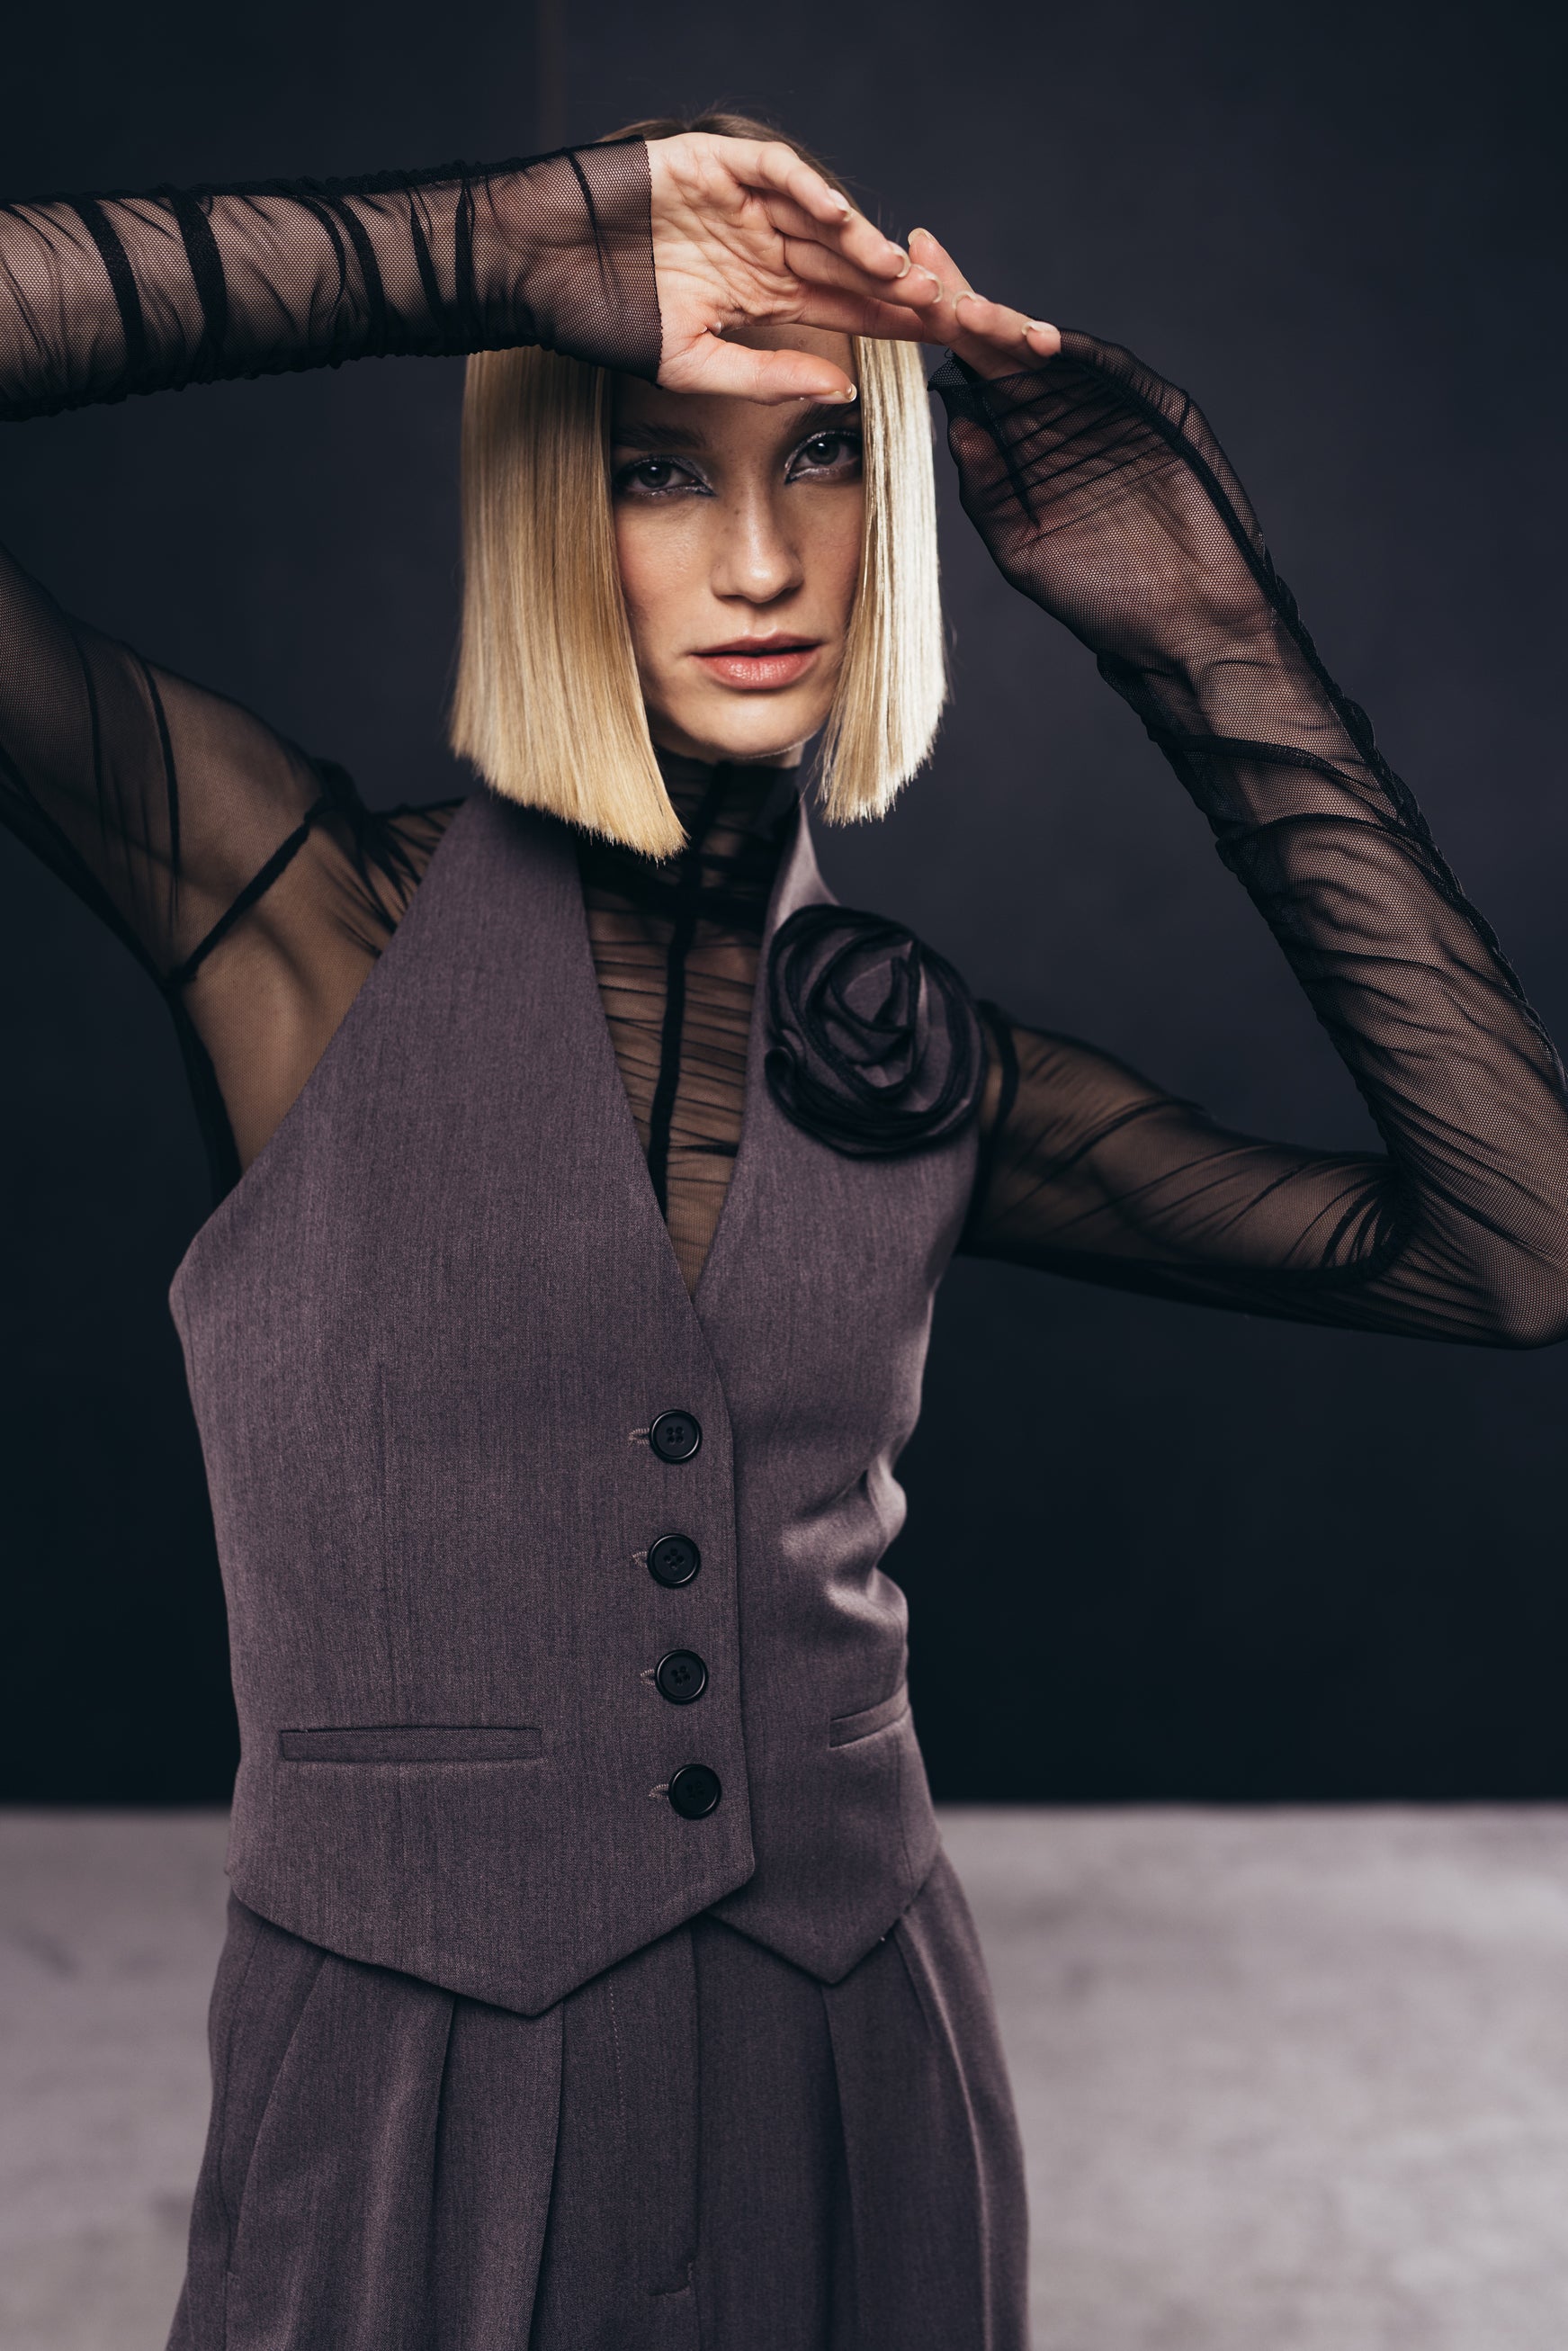 Suit waistcoat with flower detail